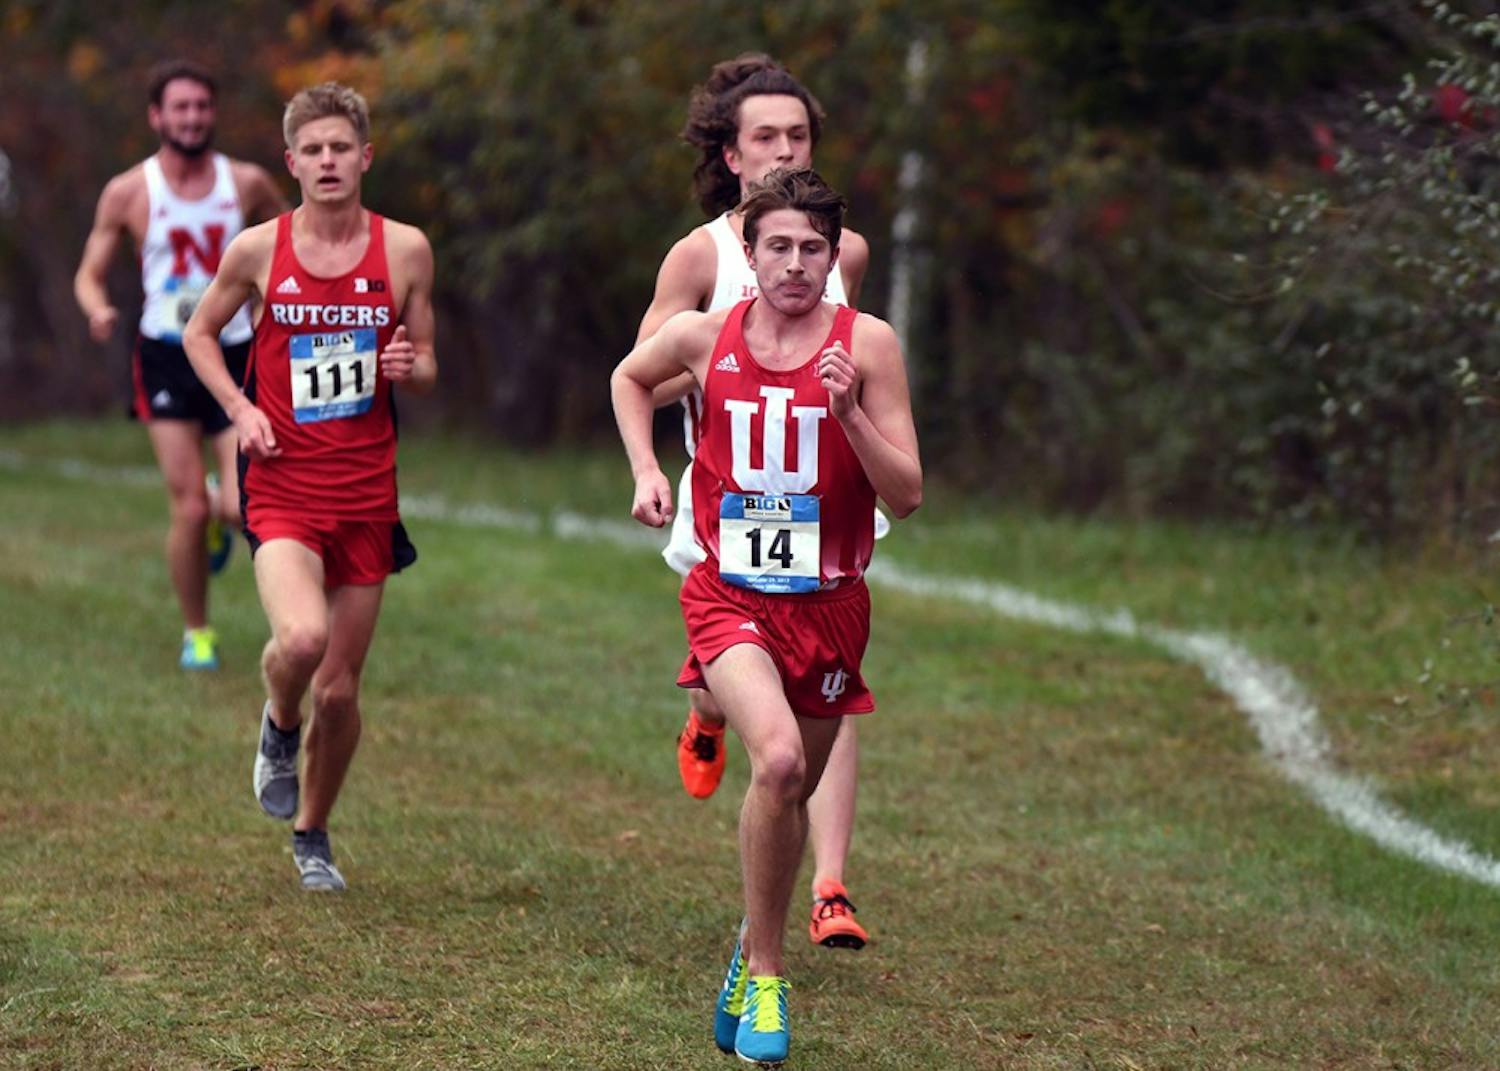 GALLERY: IU Cross Country competes in the 2017 Big Ten Championship